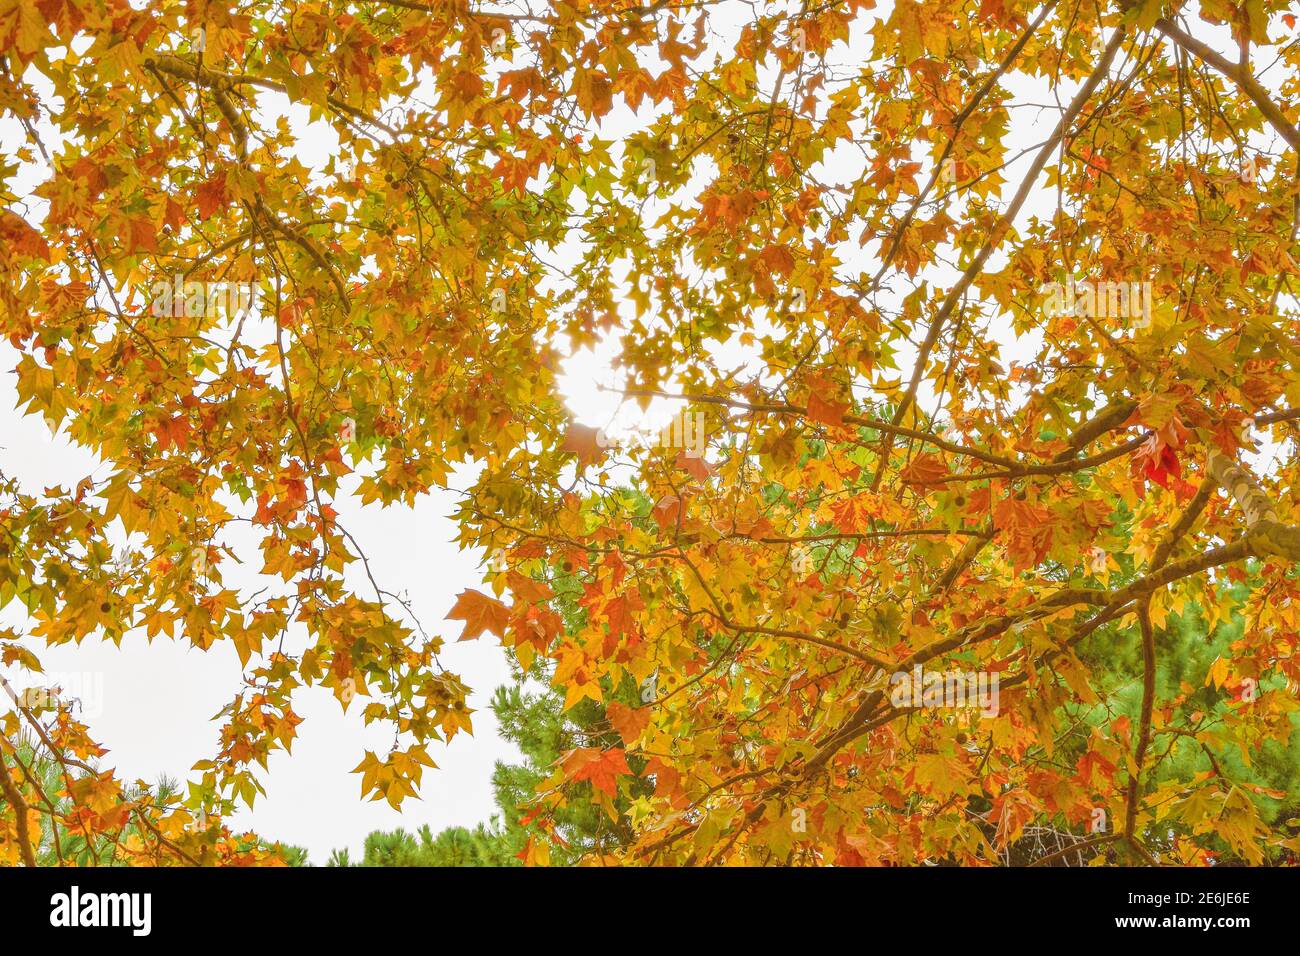 beautiful yellow, green and orange leaves of the trees Stock Photo